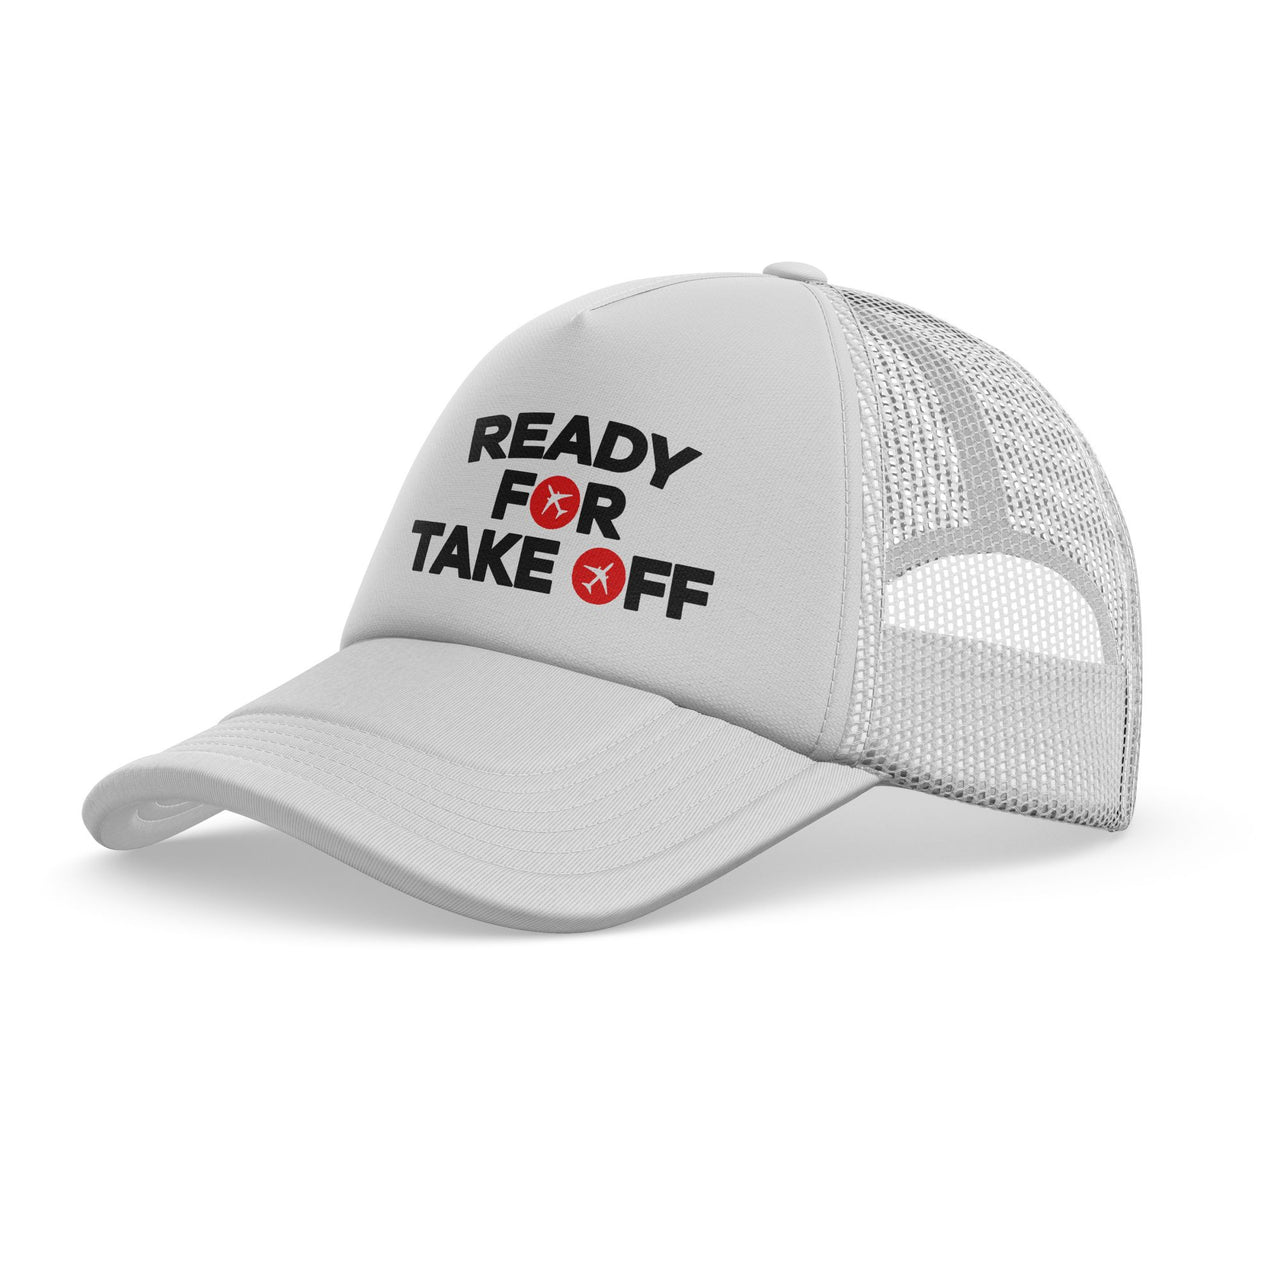 Ready For Takeoff Designed Trucker Caps & Hats